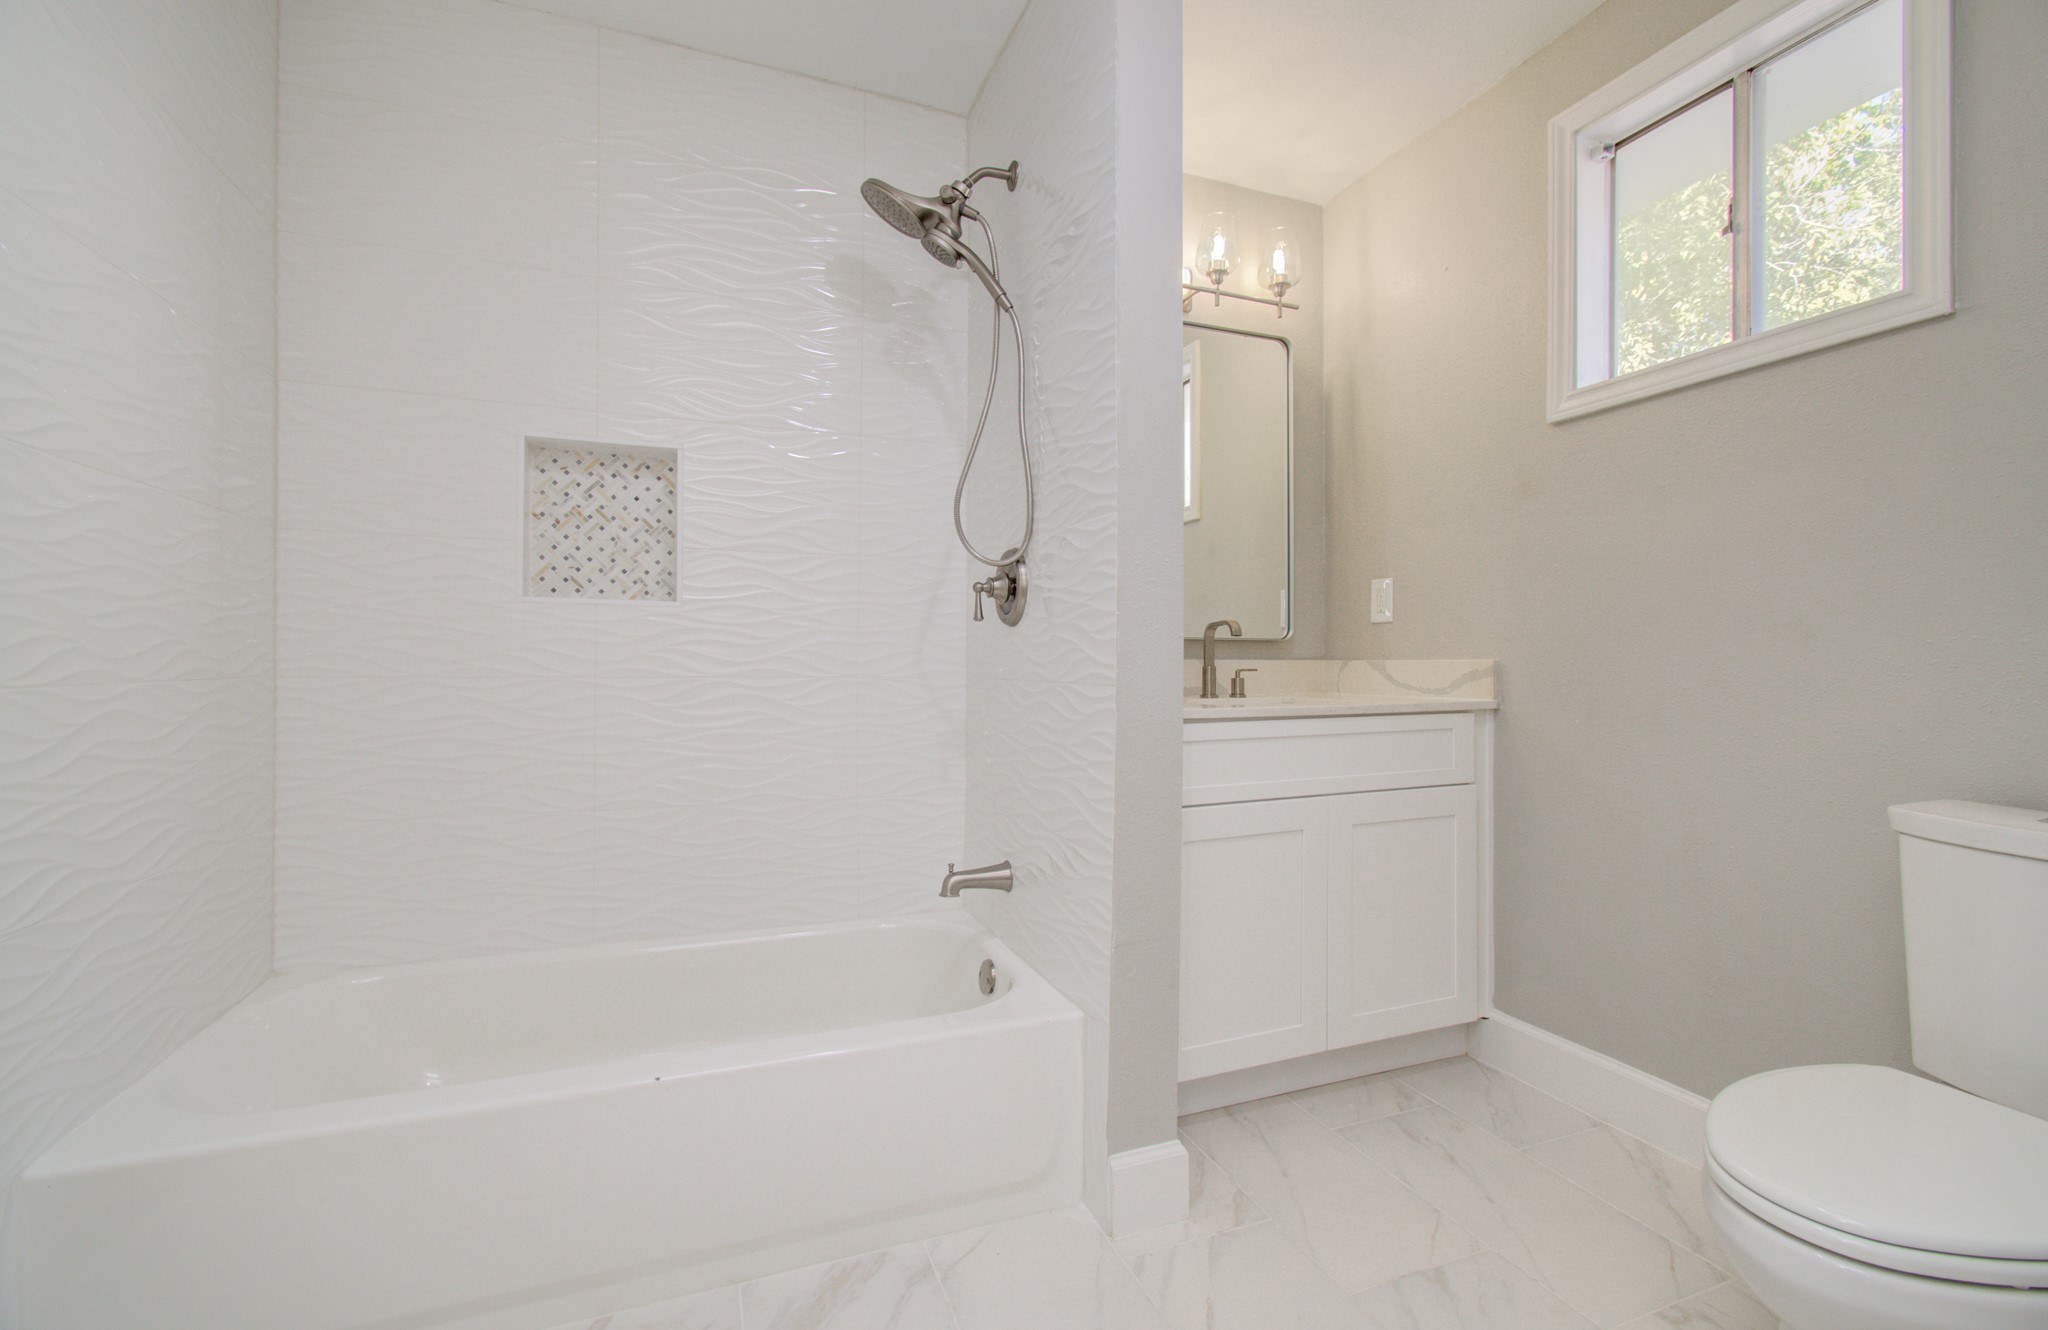 The guest hallway bathroom includes a tub/shower and new washer/dryer connections and drainage for an indoor laundry room!